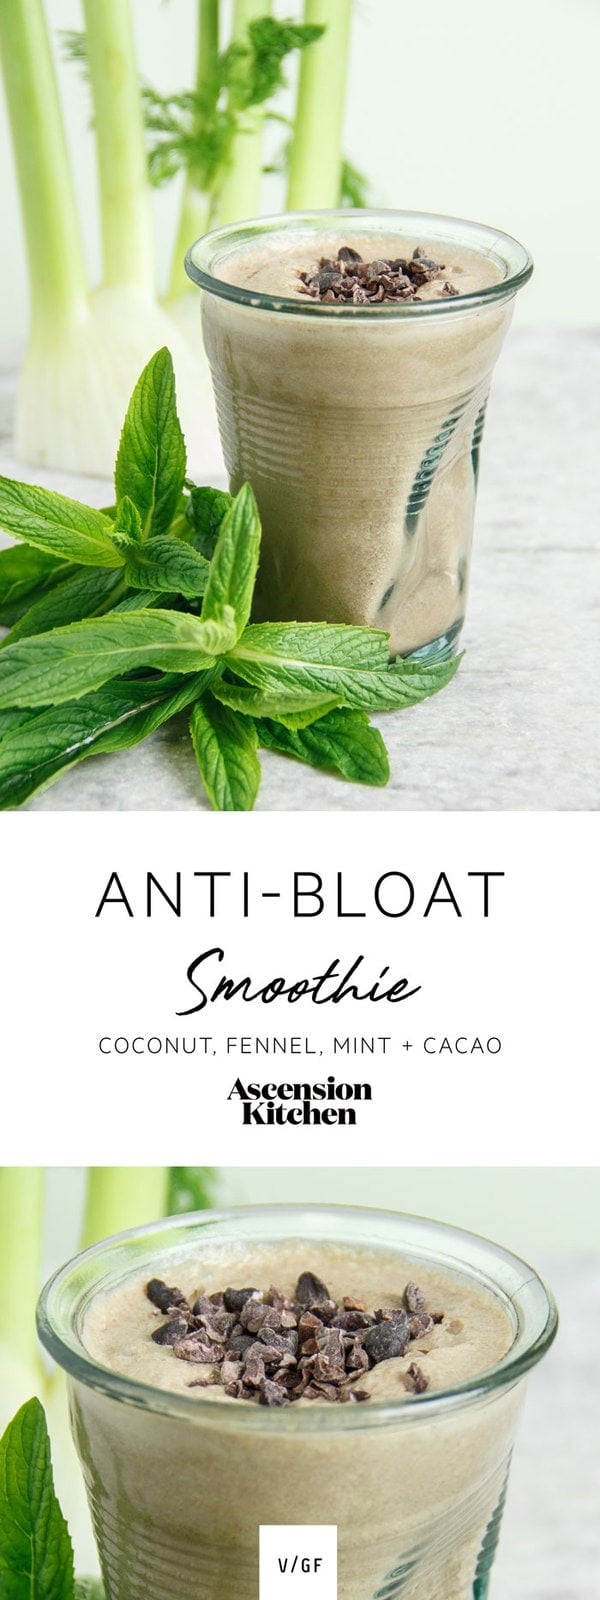 Anti Bloat Smoothie with Coconut Fennel Mint and Cacao - dairy free